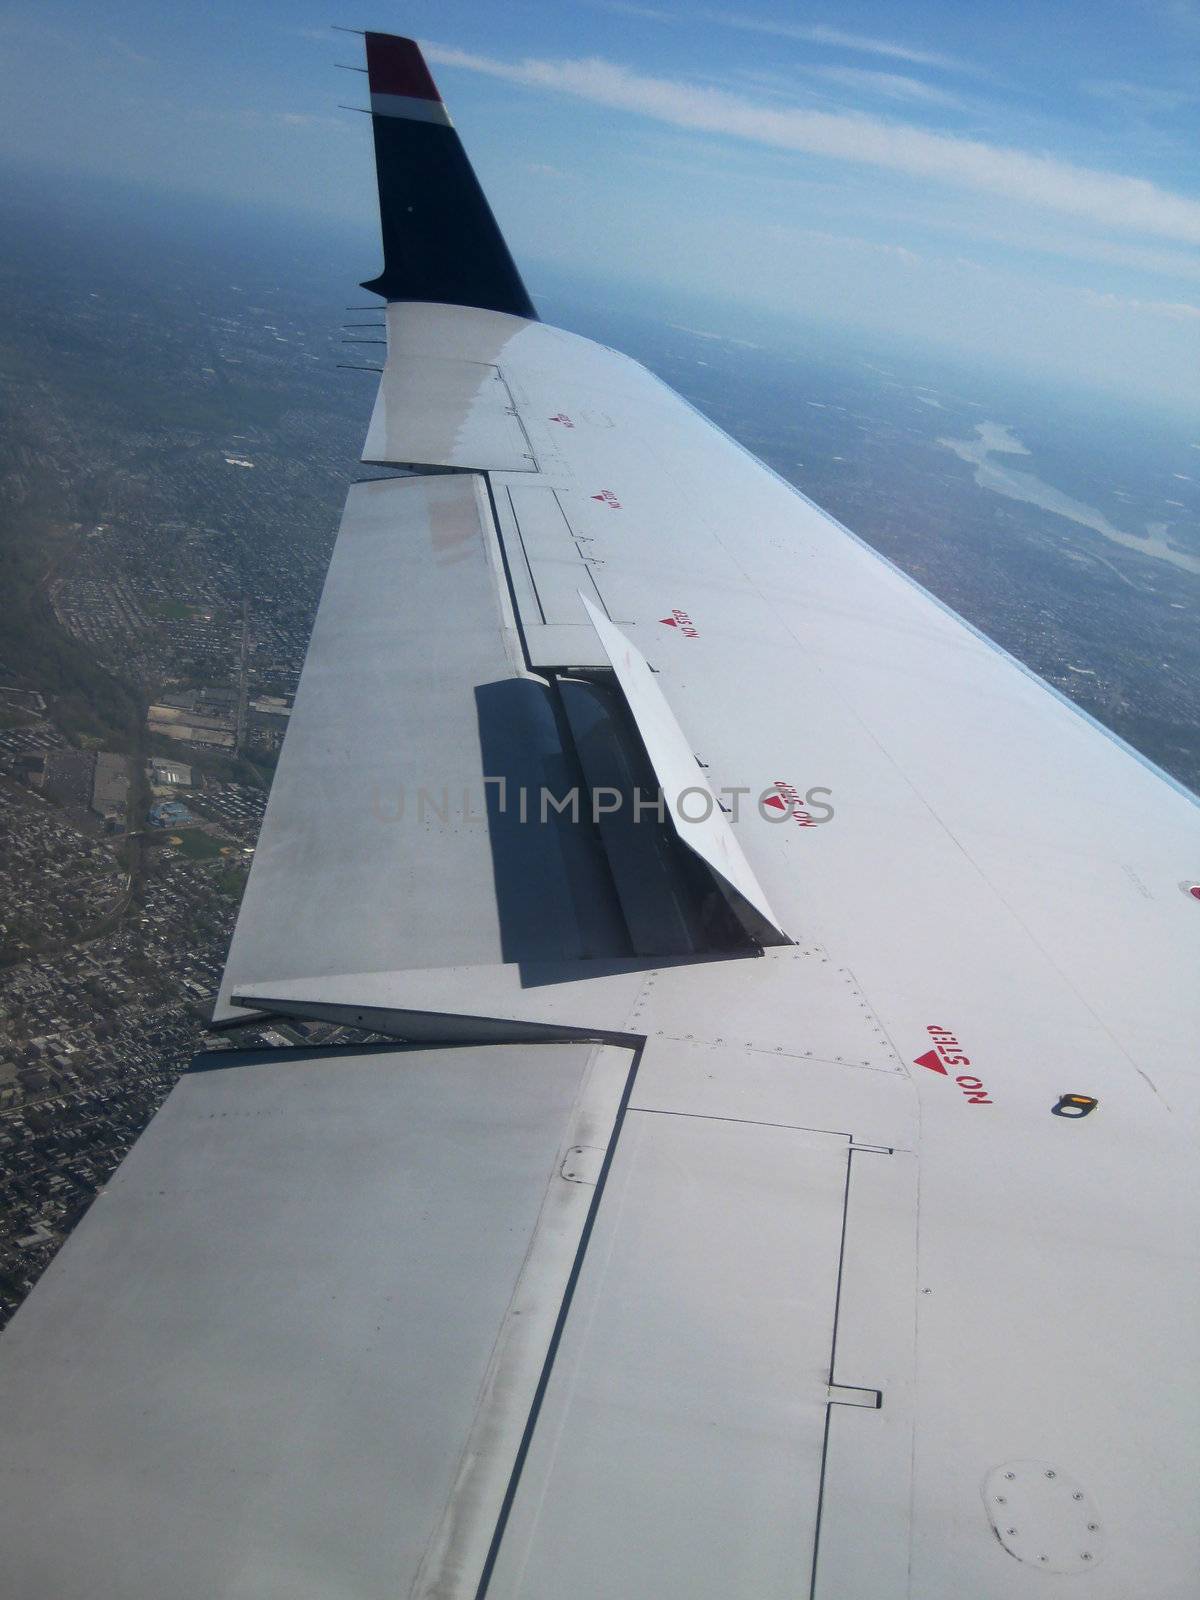 stock pictures of airplanes on the ground in an airport
